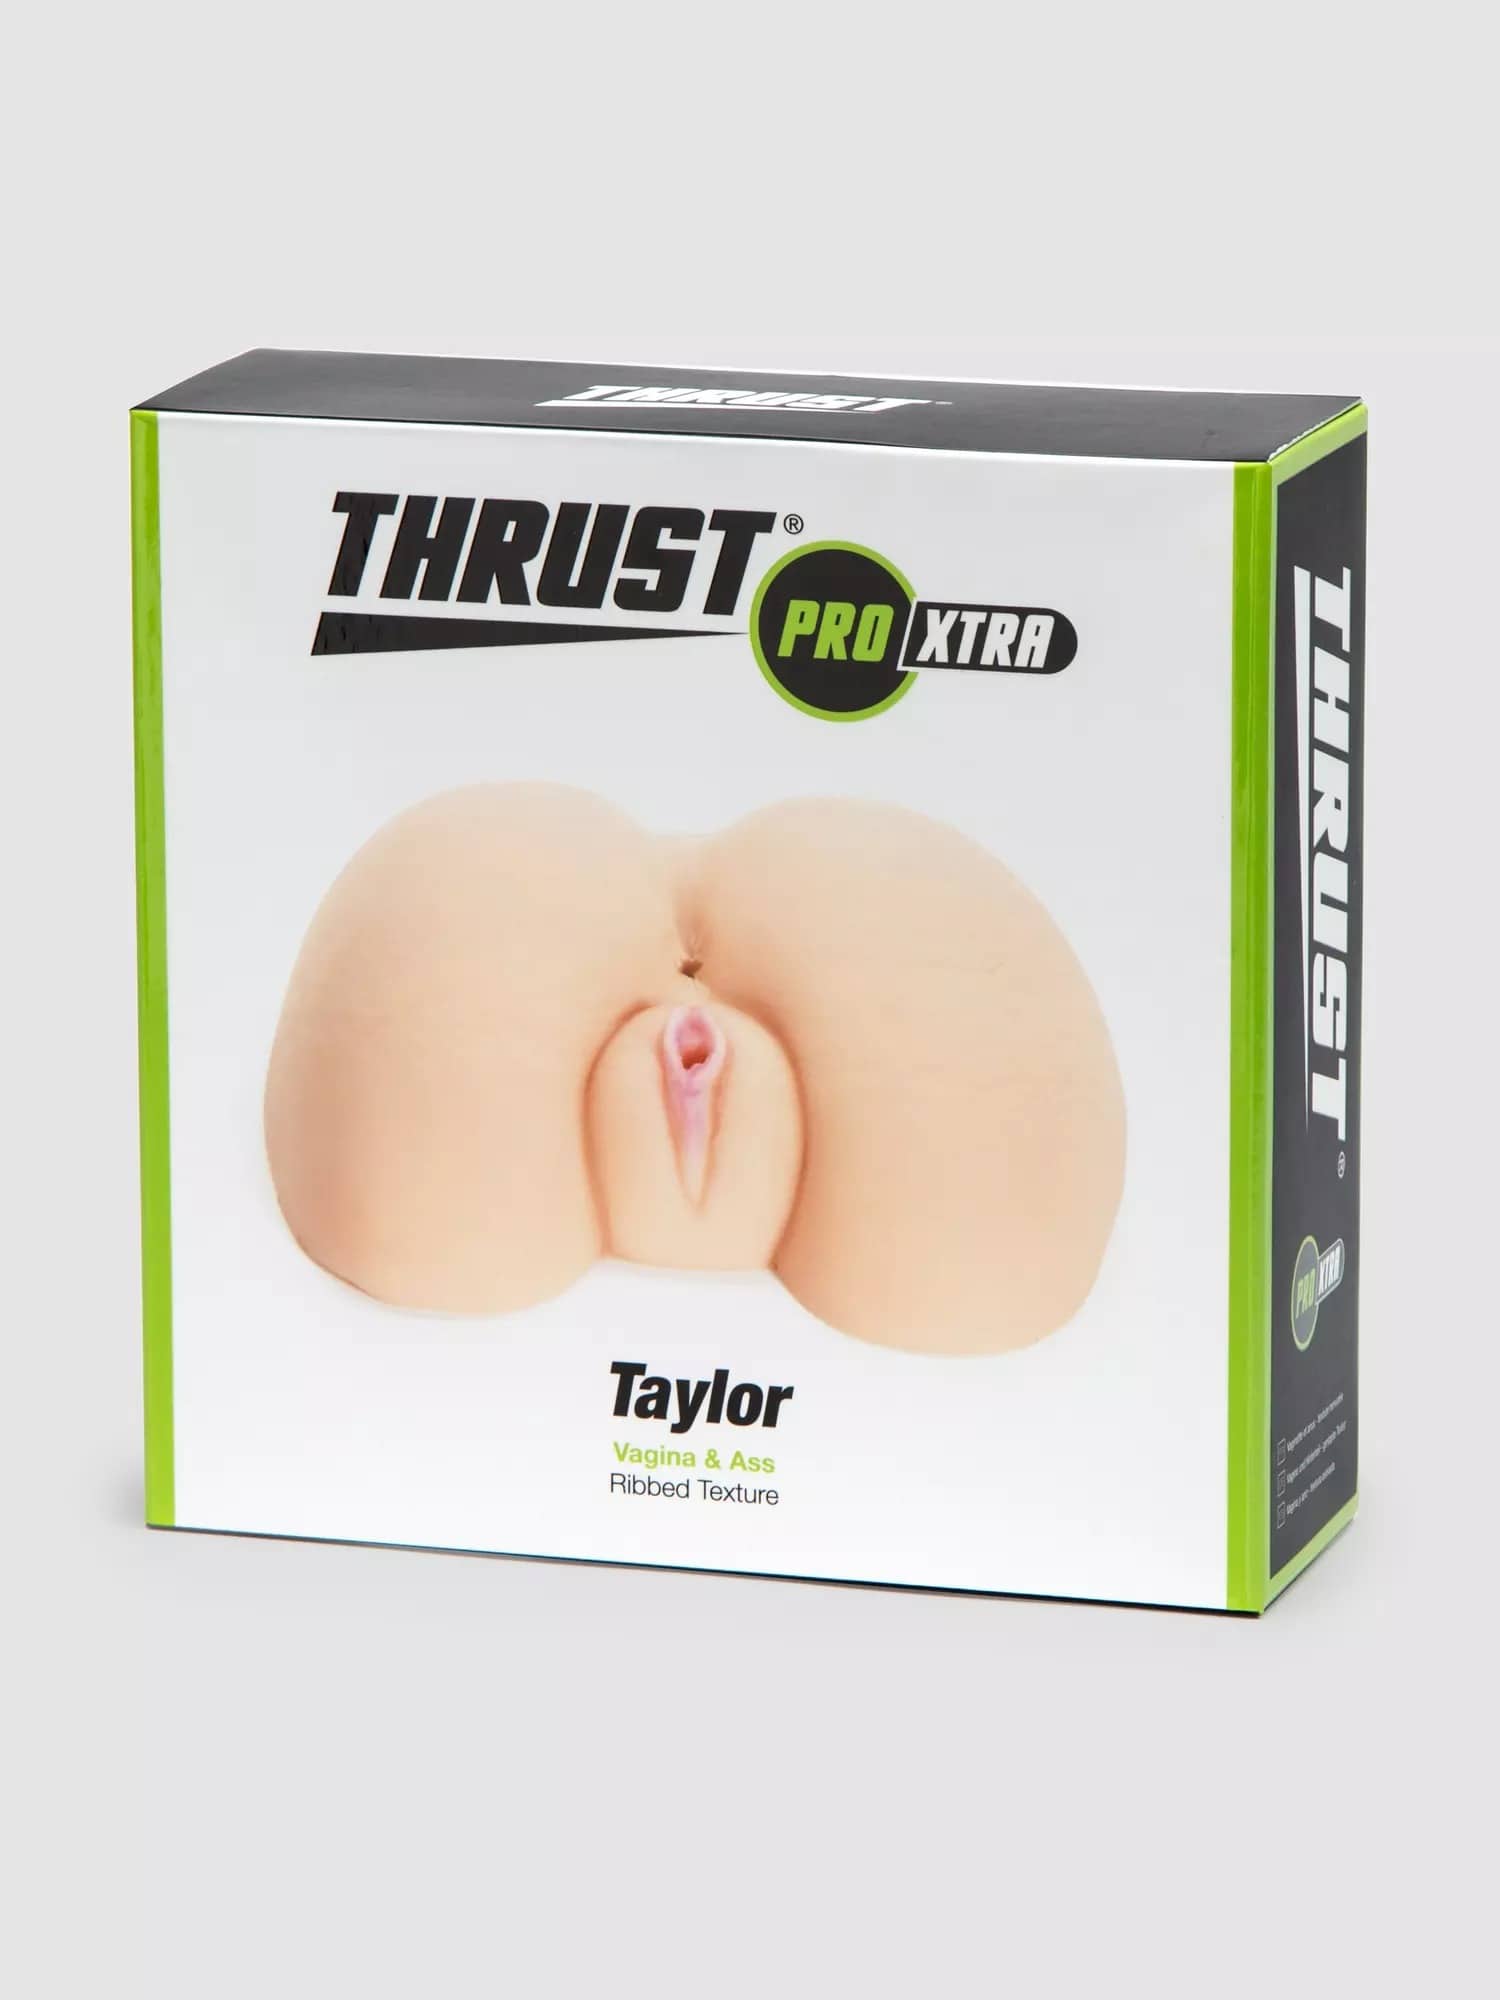 THRUST Pro Xtra Taylor Ribbed Realistic Vagina and Ass 27.1oz			 			. Slide 5